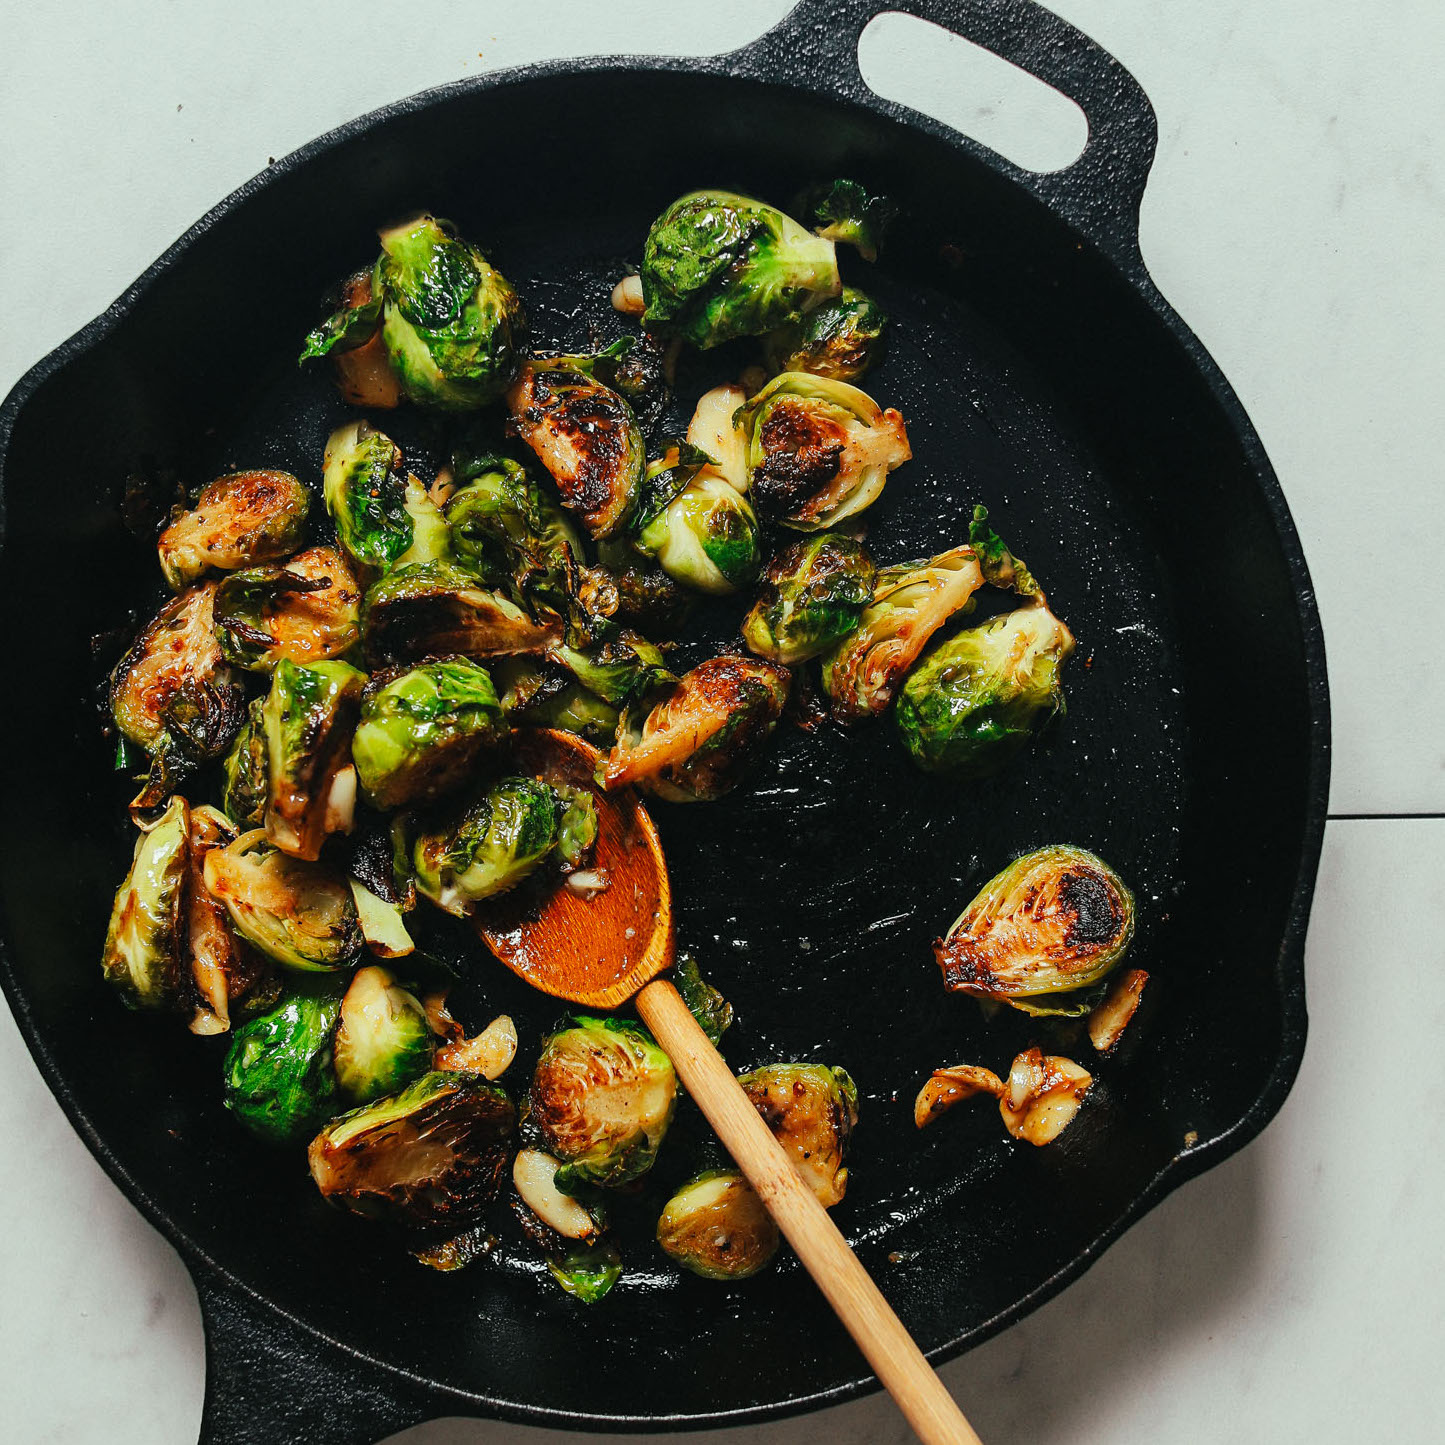 Skillet of Crispy Roasted Brussels Sprouts with Miso Glaze